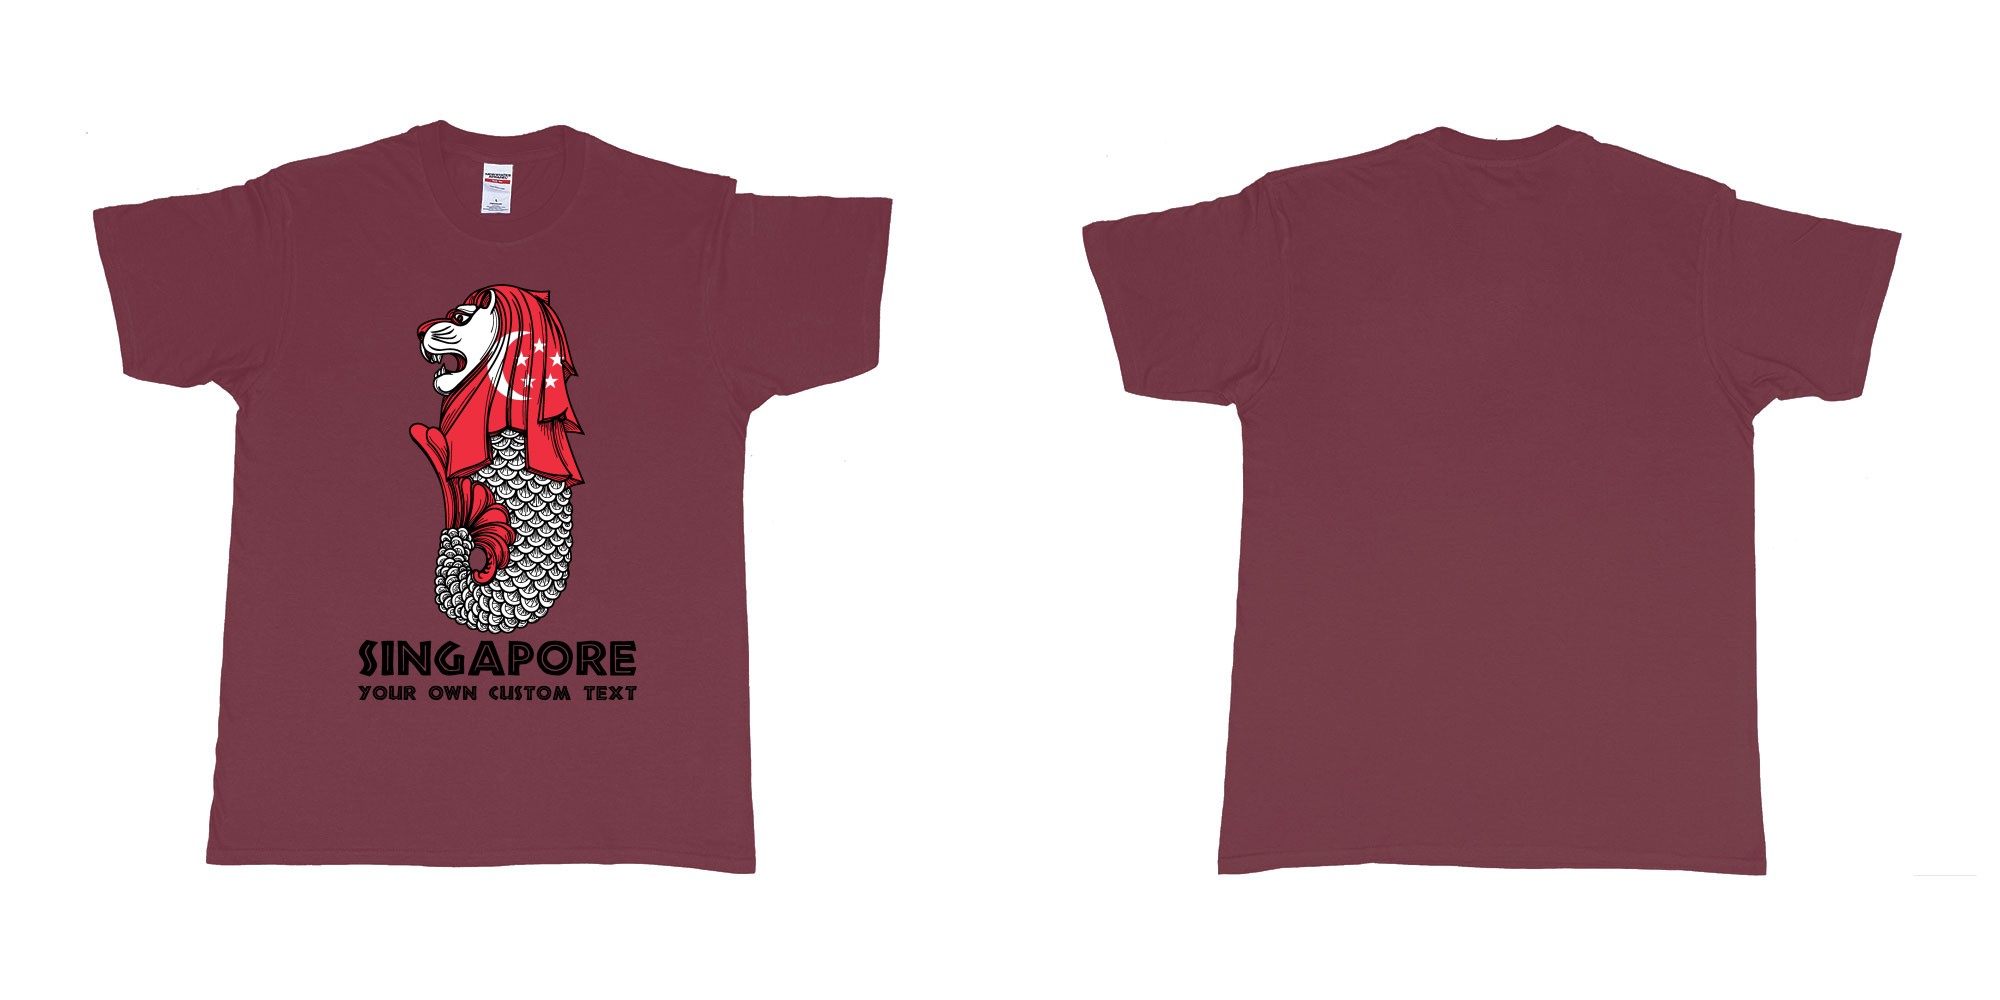 Custom tshirt design merlion singapore mascot statue lion in fabric color marron choice your own text made in Bali by The Pirate Way